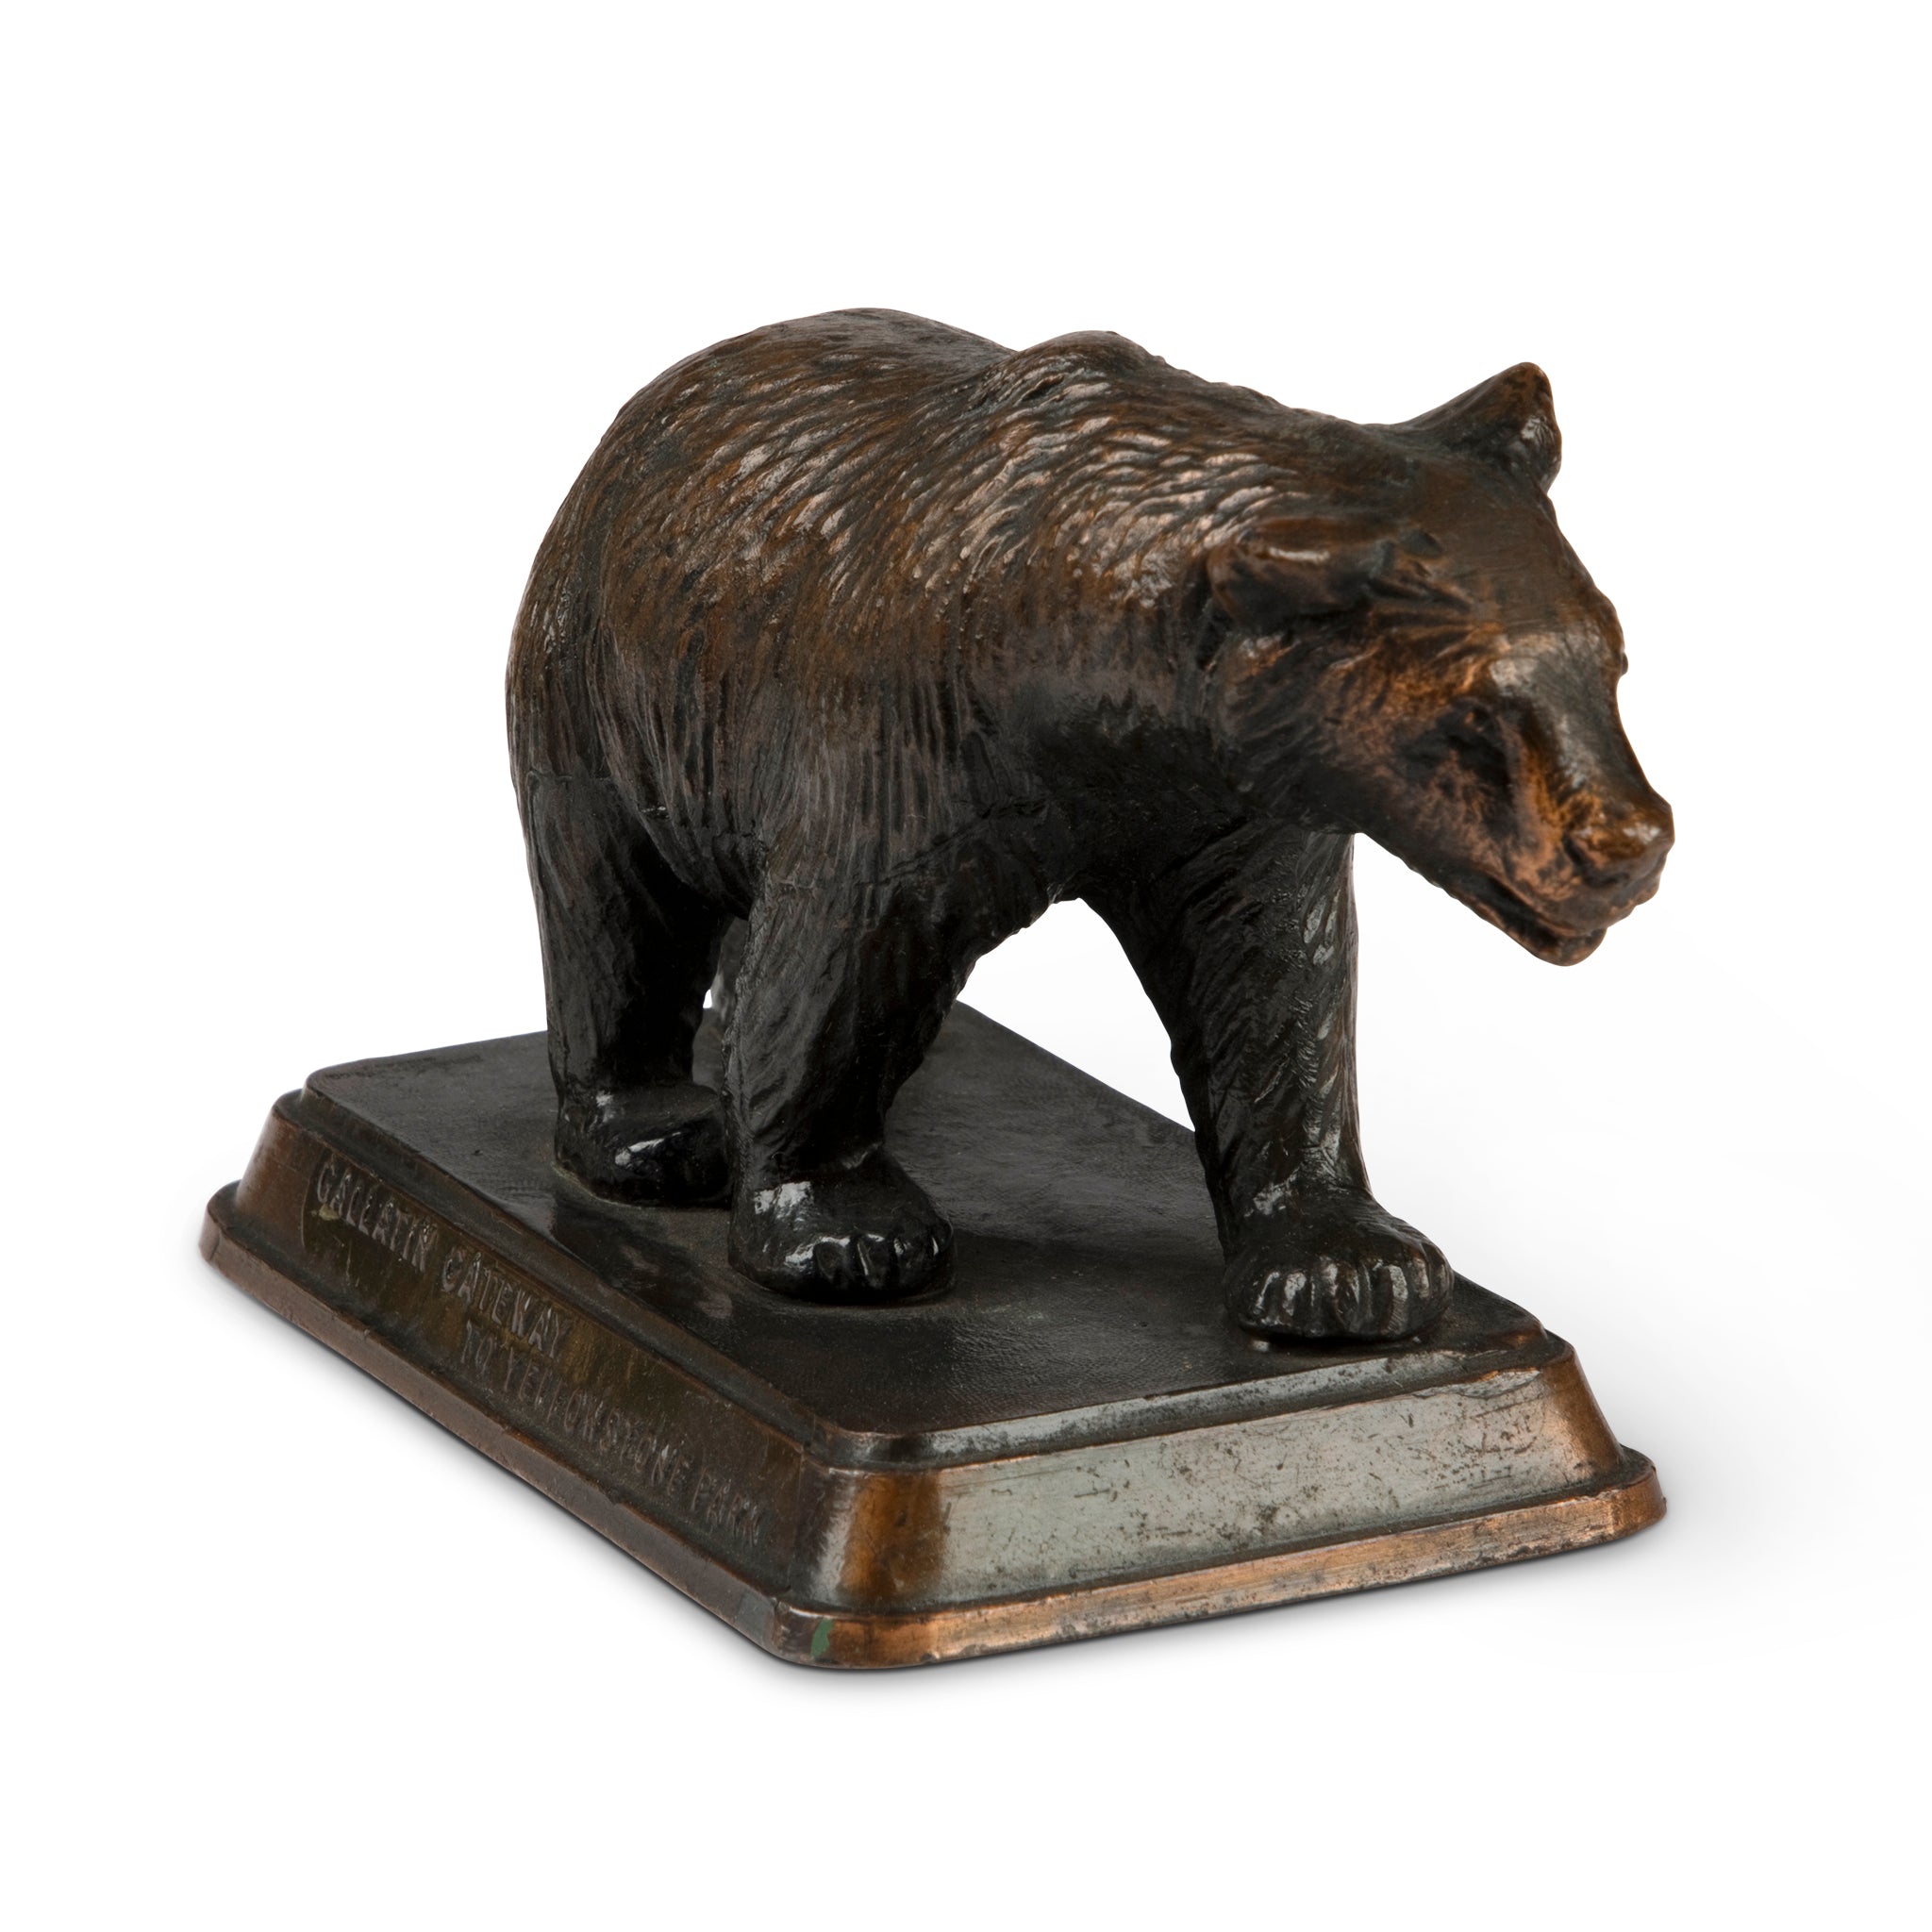 Vintage Grizzly Bear Paperweight